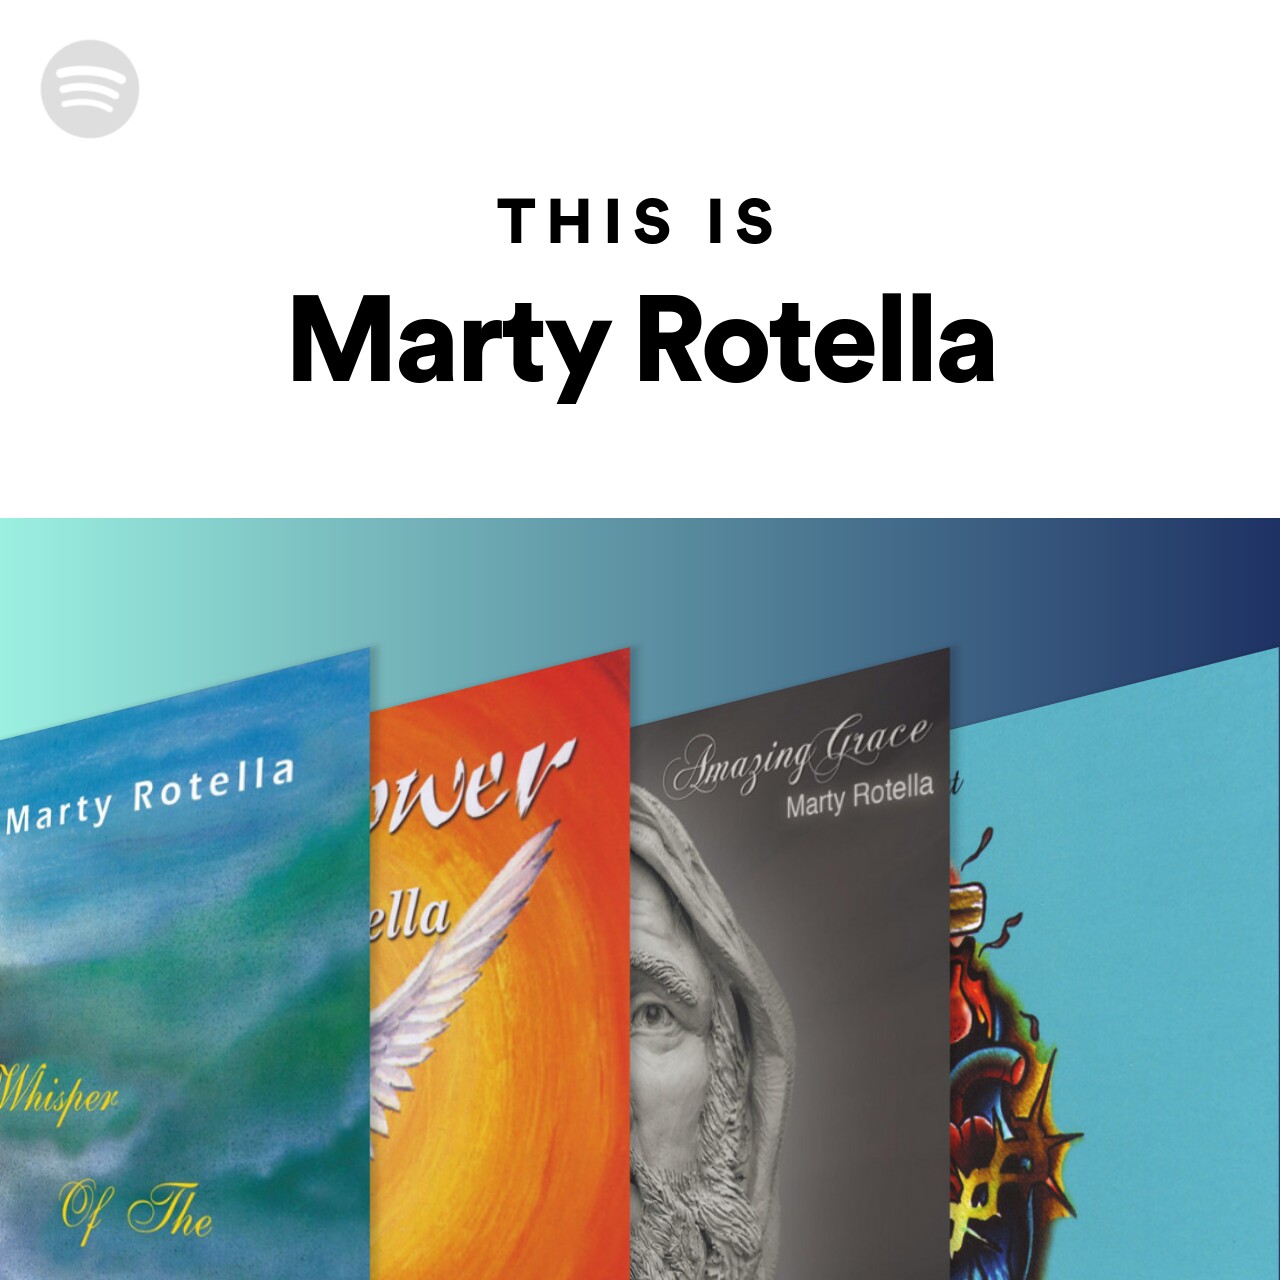 This Is Marty Rotella Spotify Playlist